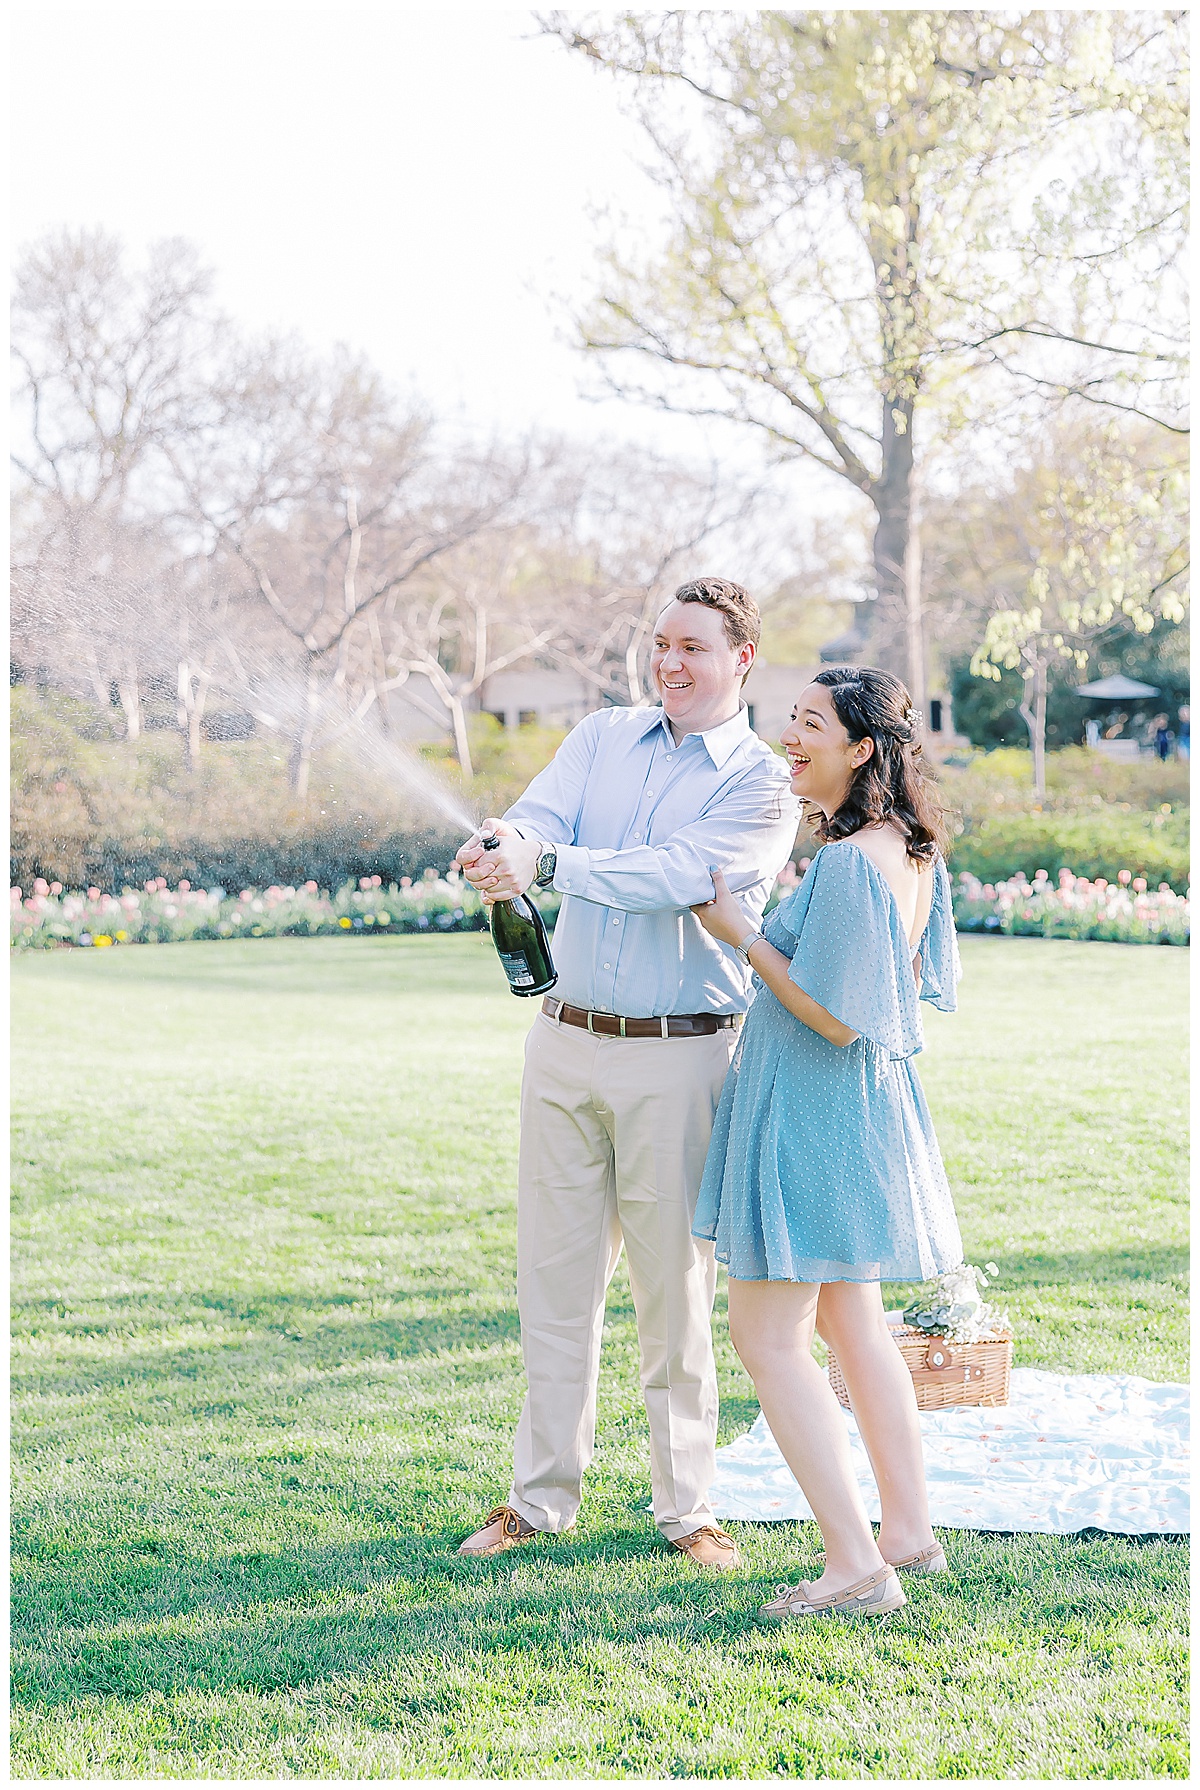 dallas engagement session, dallas engagement photographer, dallas wedding photographer, the cinnamon barn, dallas arboretum engagement, dallas arboretum engagement session, dallas engagement session, brides of north texas, champagne pop